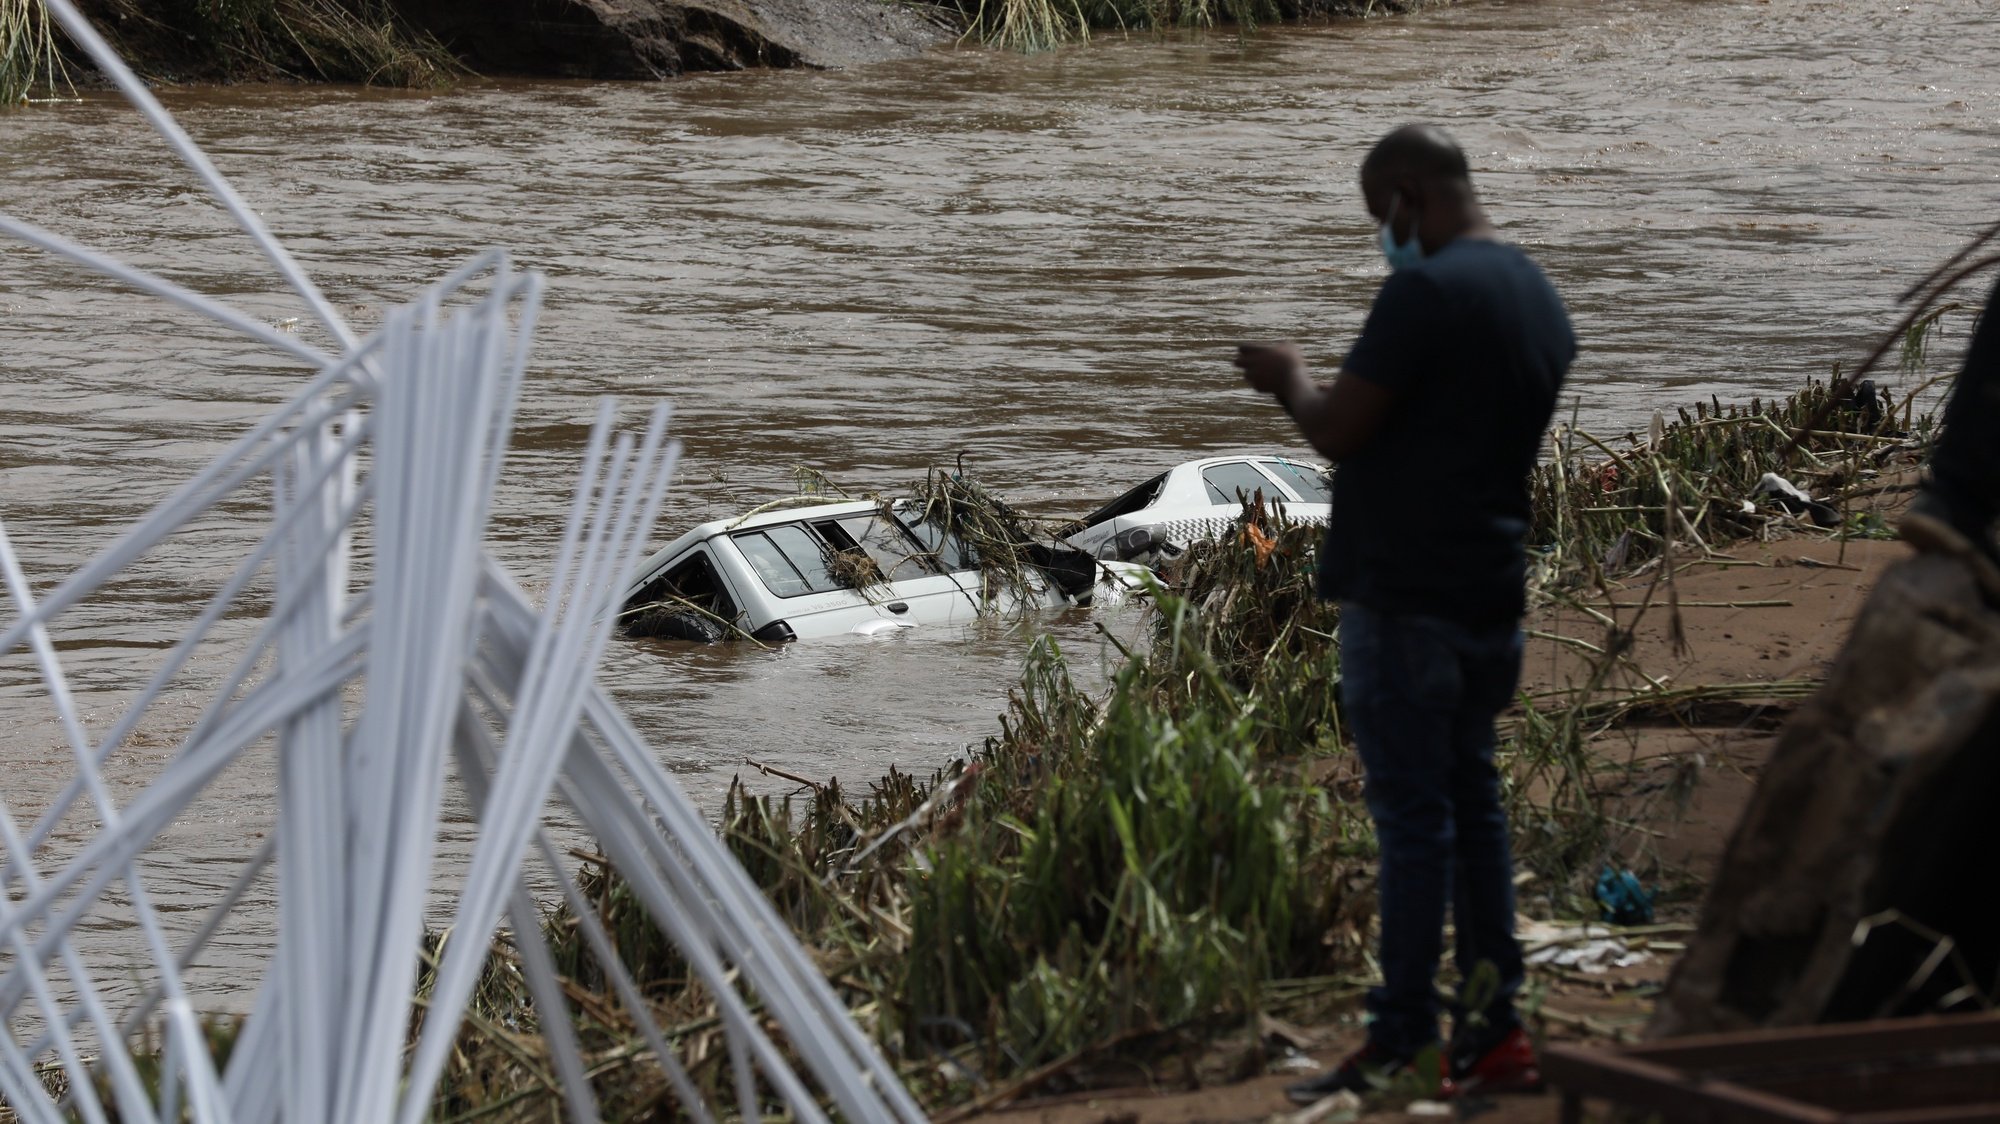 epa09886248 Two cars are submerged in flood waters near Durban, South Africa, 12 April 2022. At least 45 people have died as a result of heavy flooding in the Eastern Coastal area. Key roads in the area have been damaged and as mudslides destroyed houses. The South African National Defense Force have been called in to assist.  EPA/STR